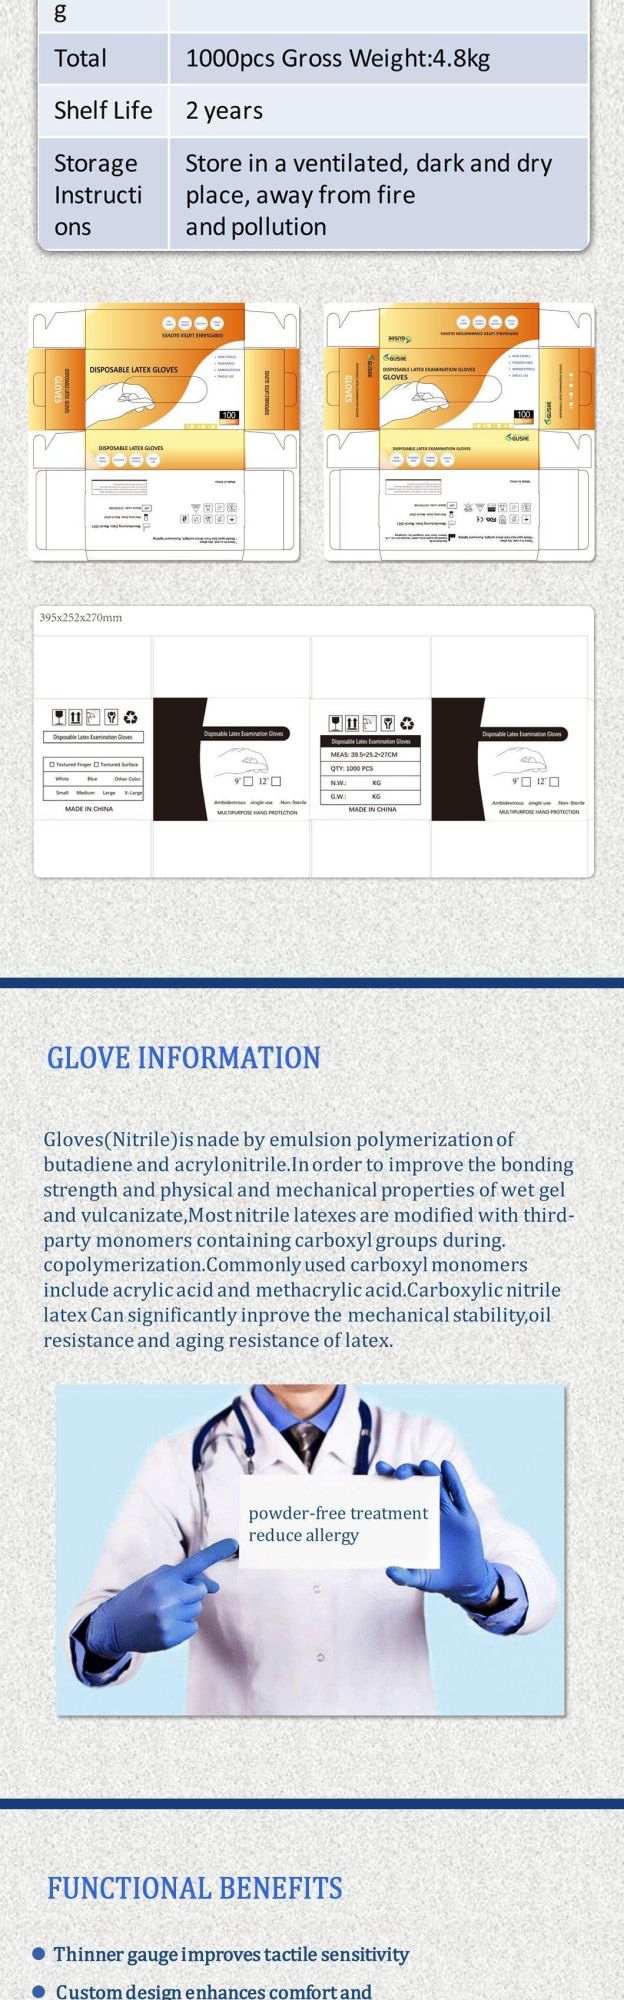 Disposable Latex Examination Gloves Powdered Medical Protect Gloves